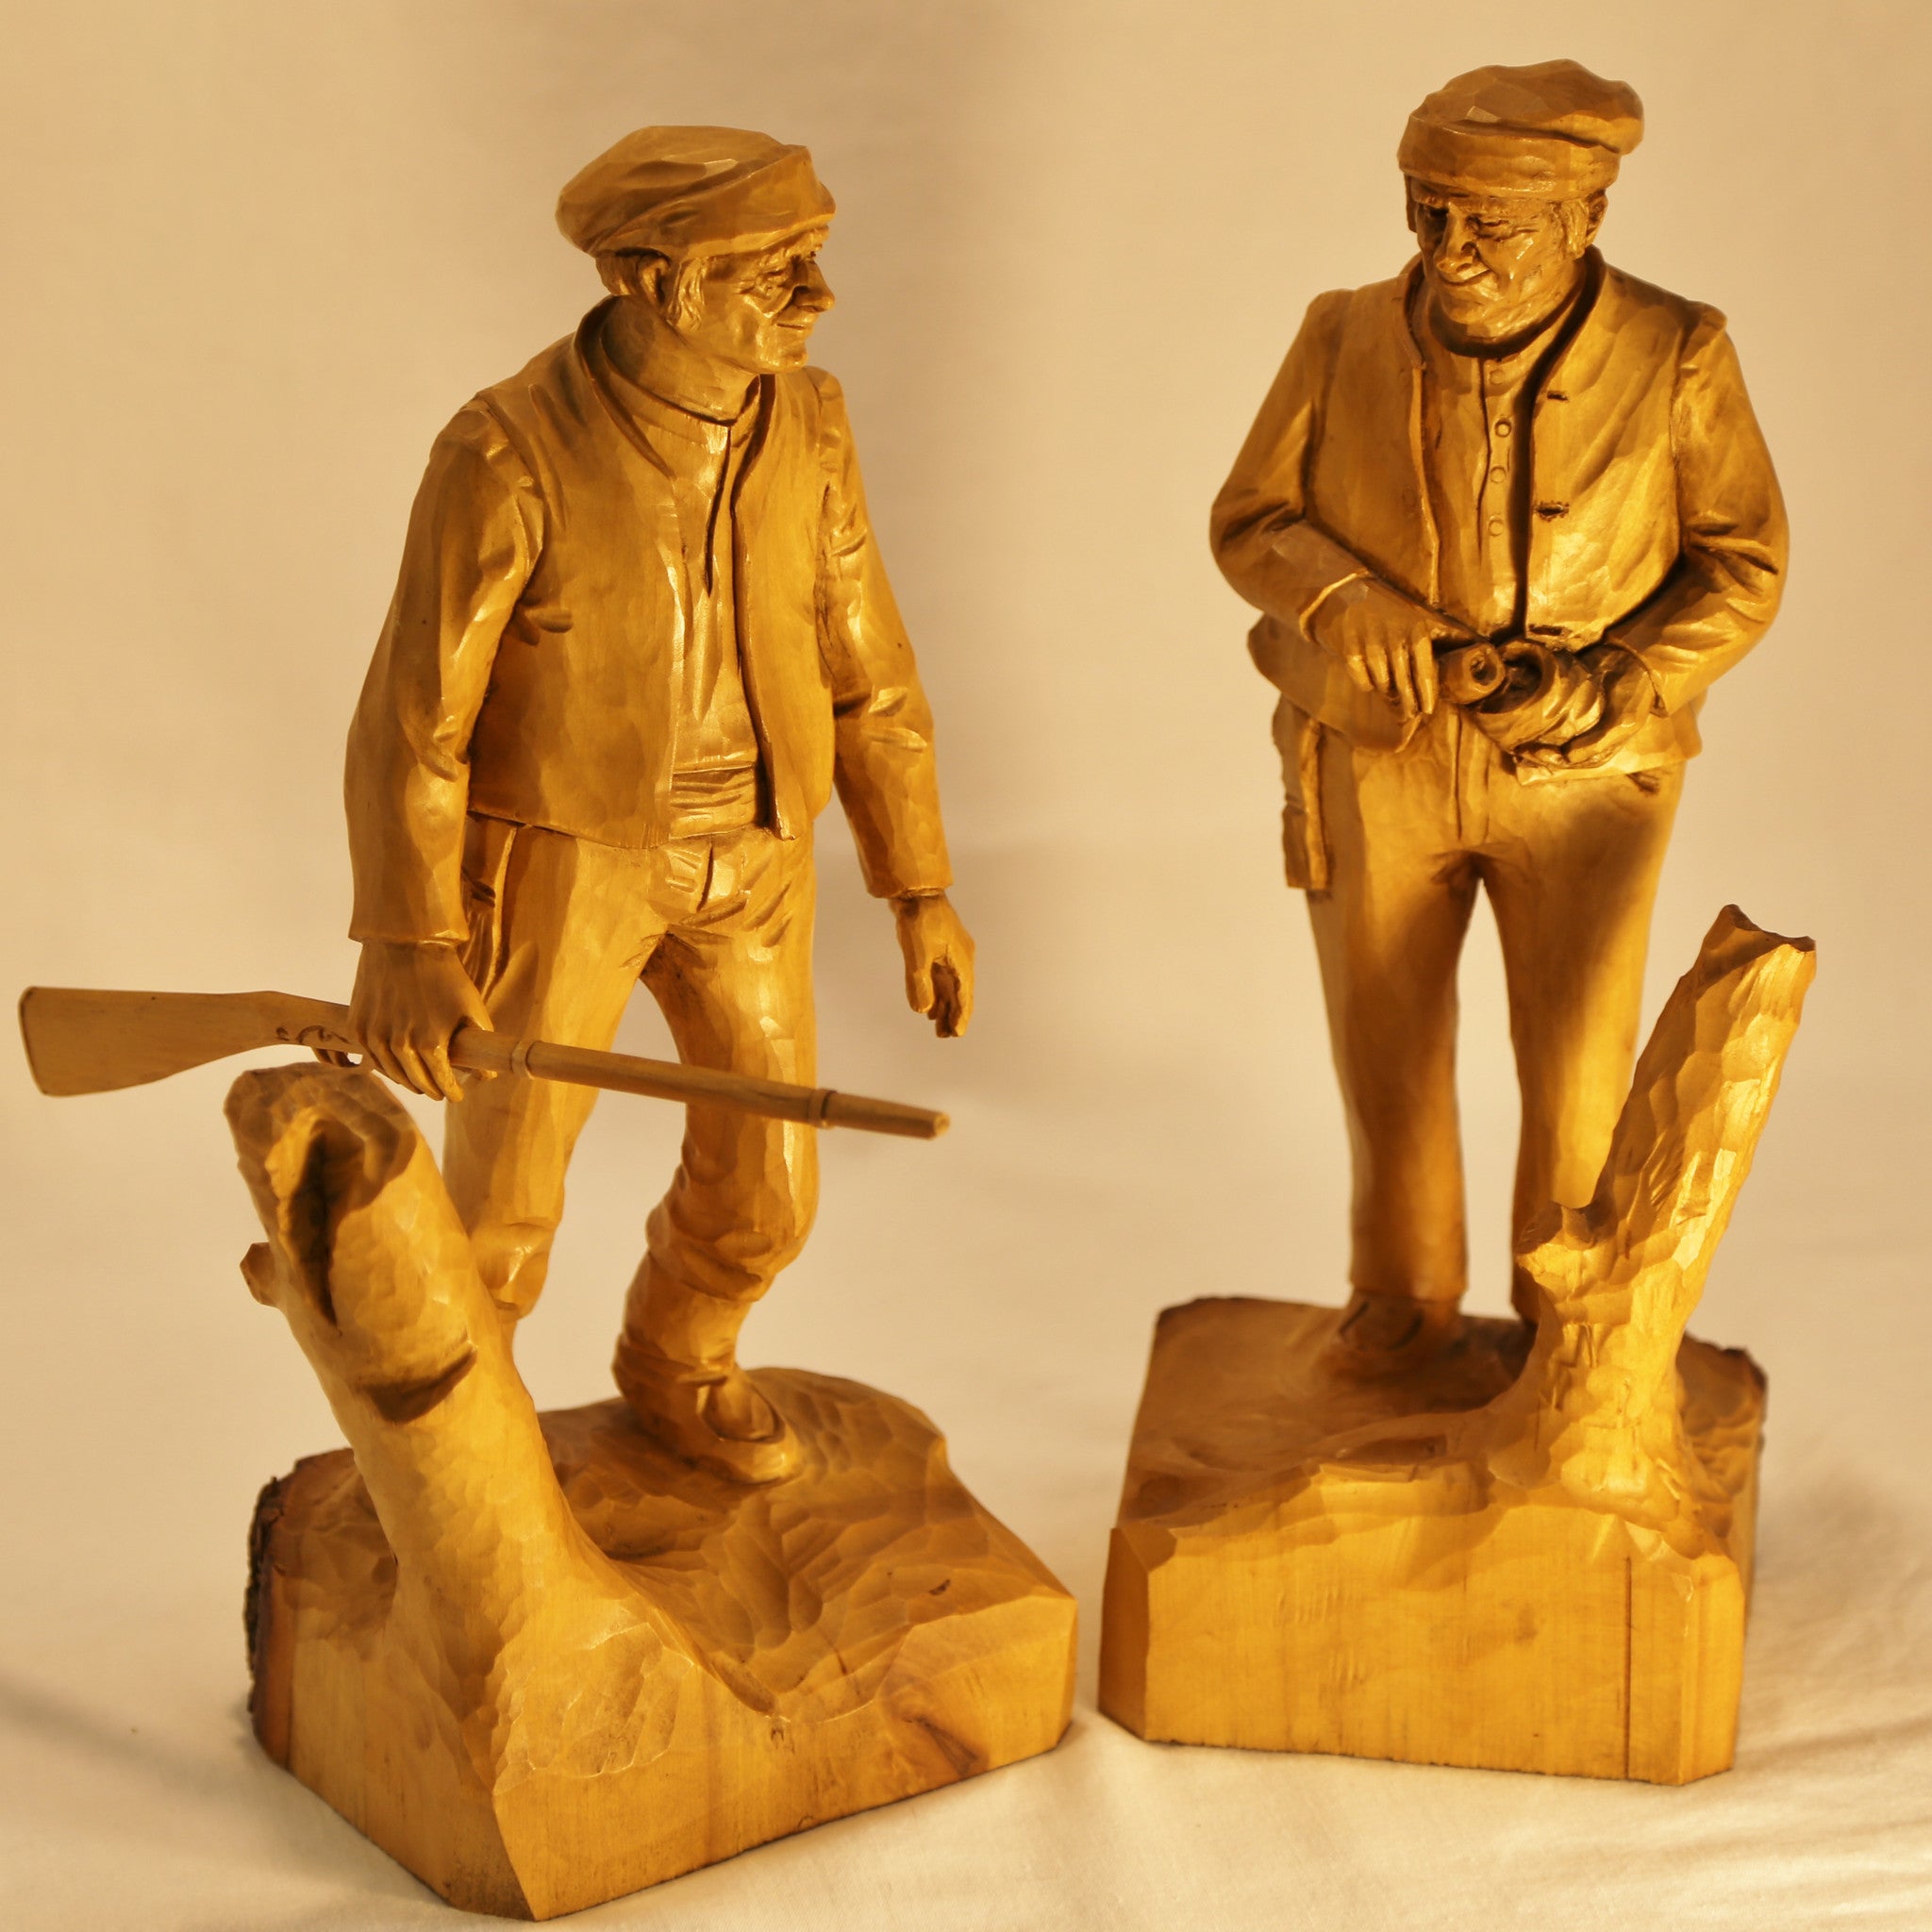 Two hunter carvings by Roger Bourgault